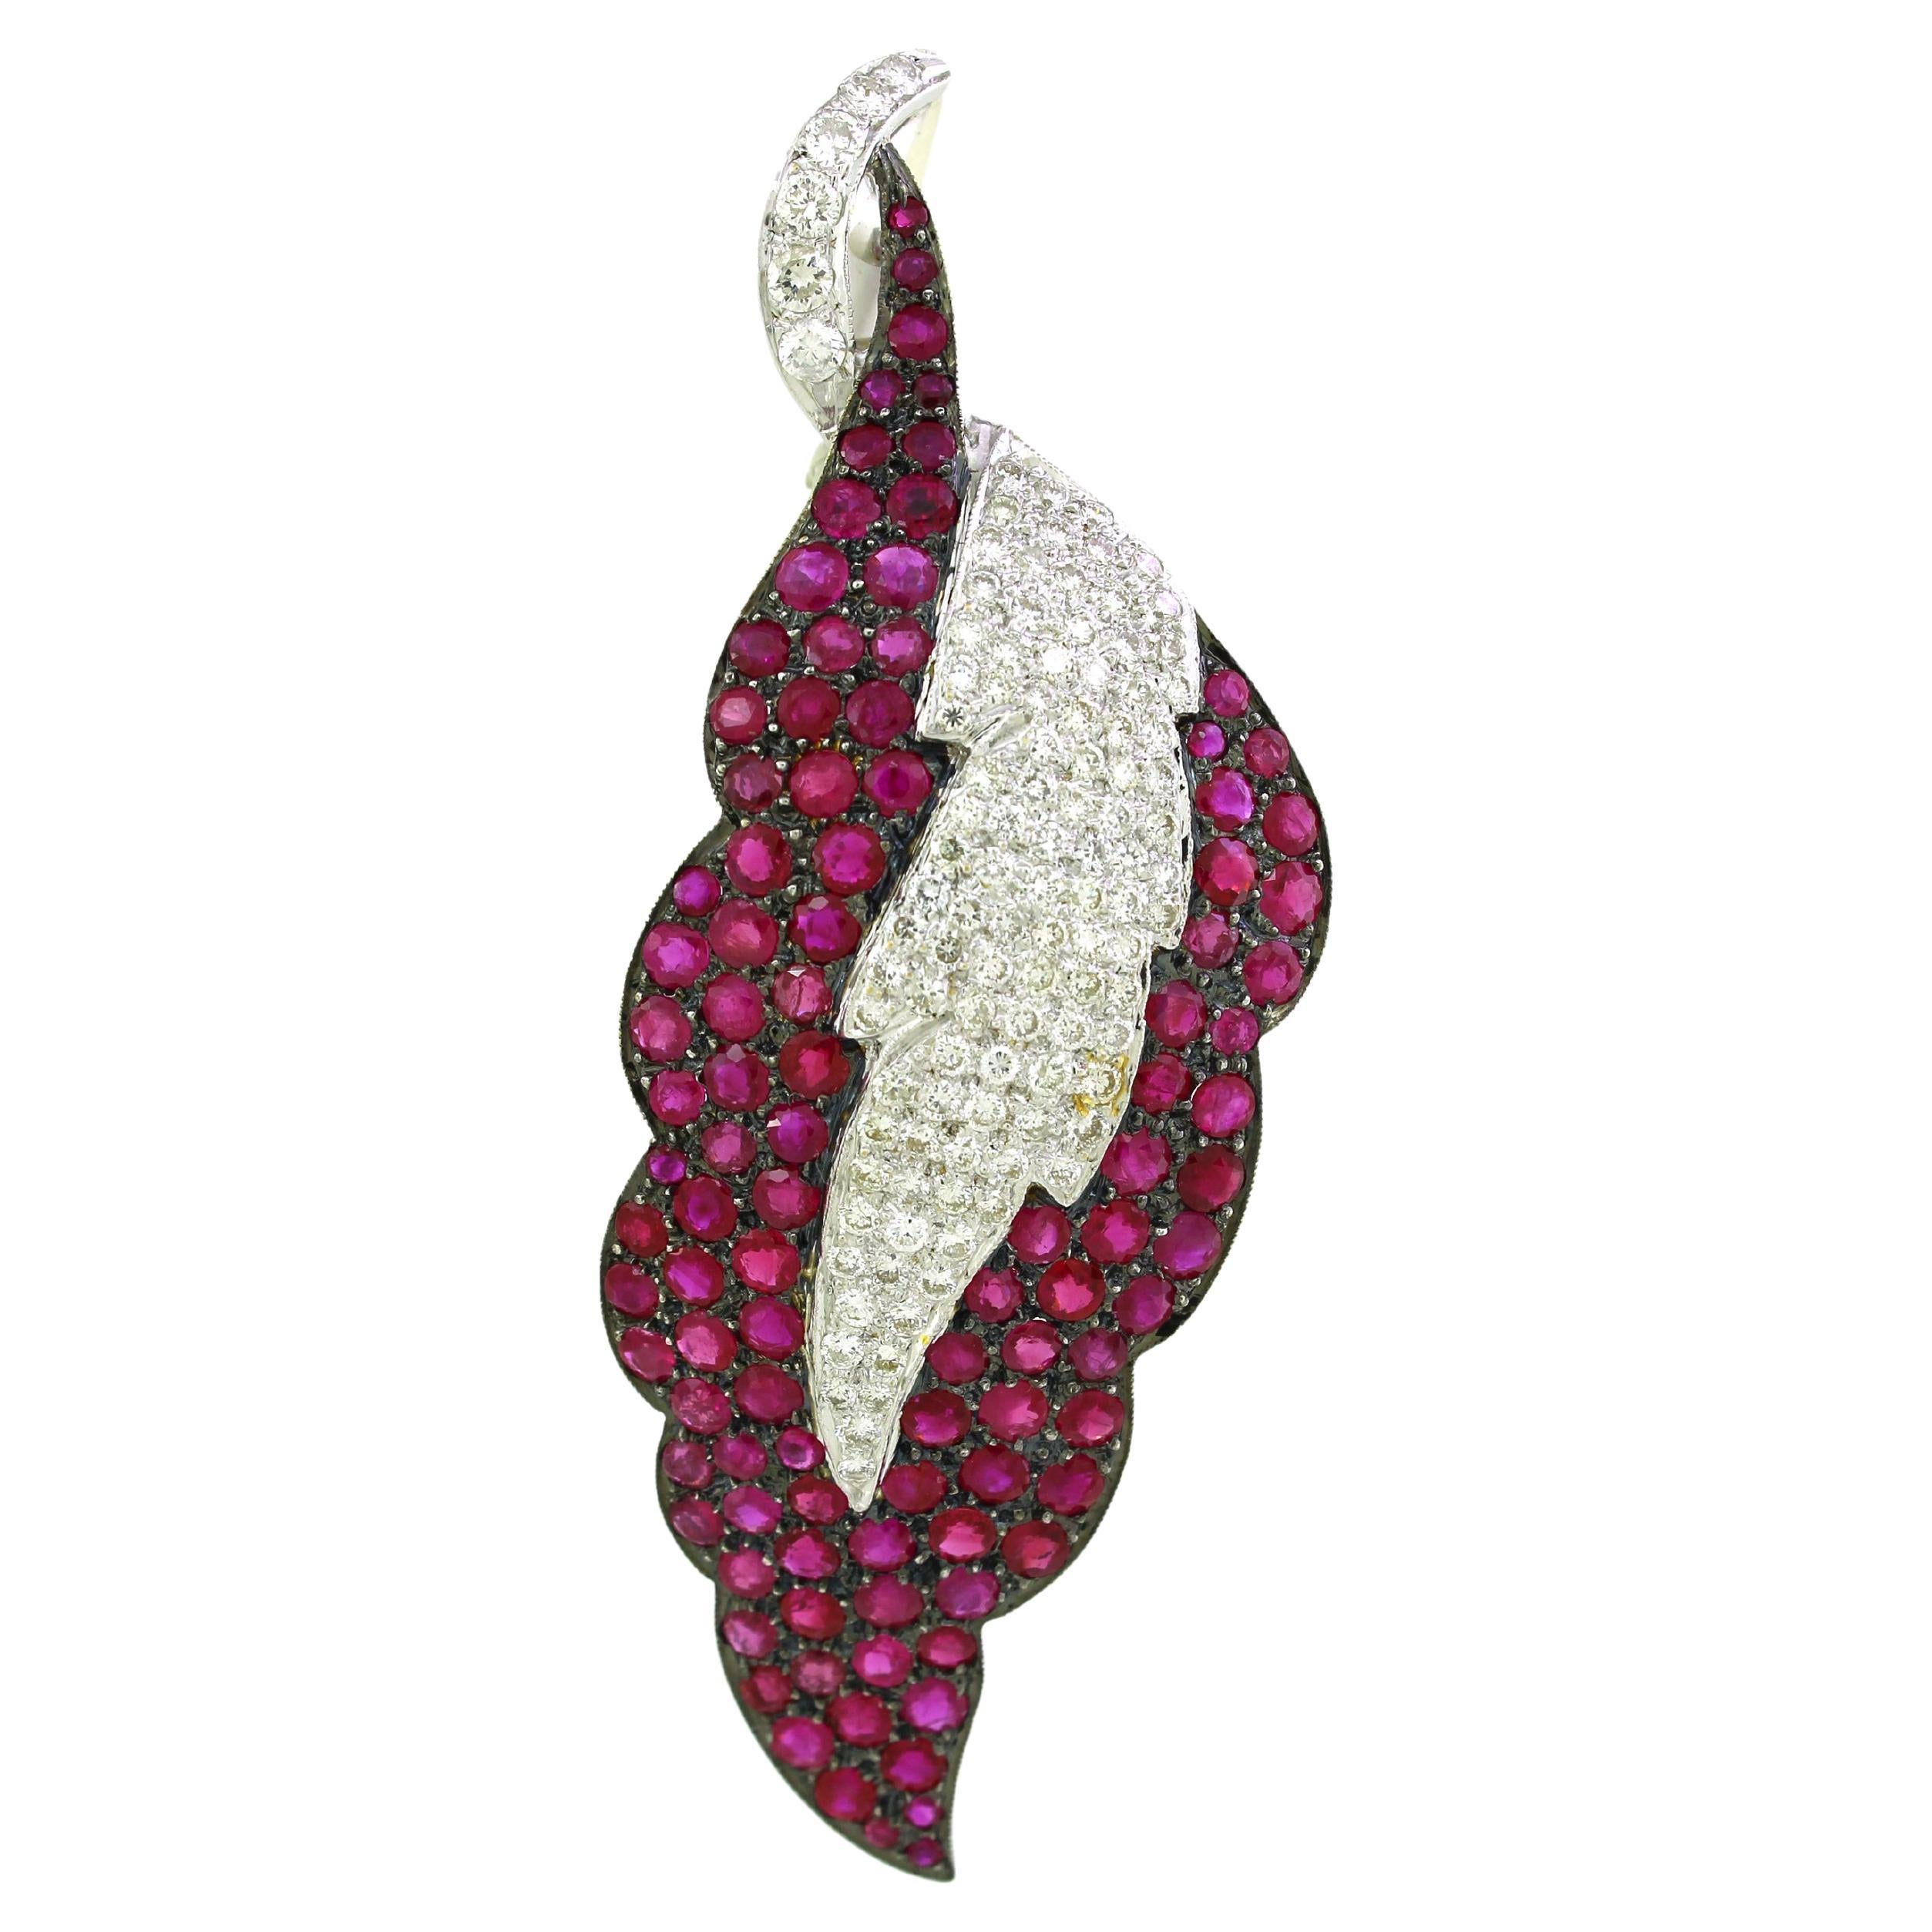 8.4 carats of Ruby leaf pendant For Sale